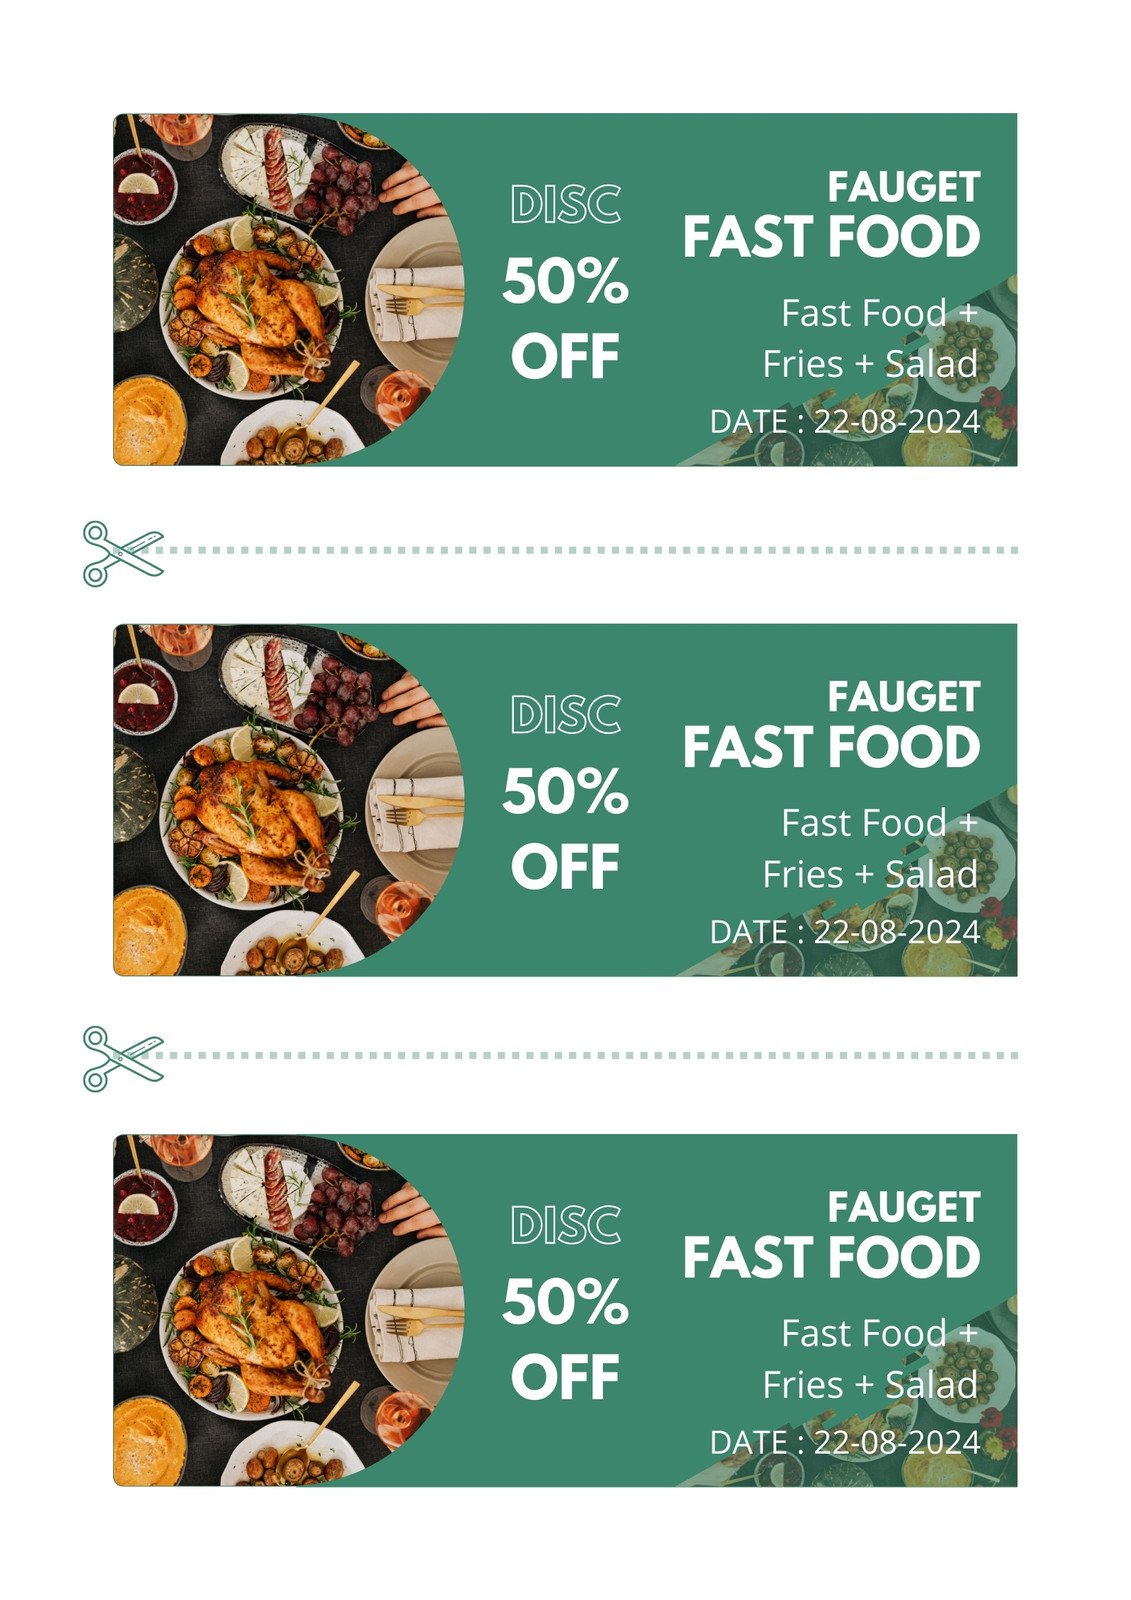 Discounted fast food coupons